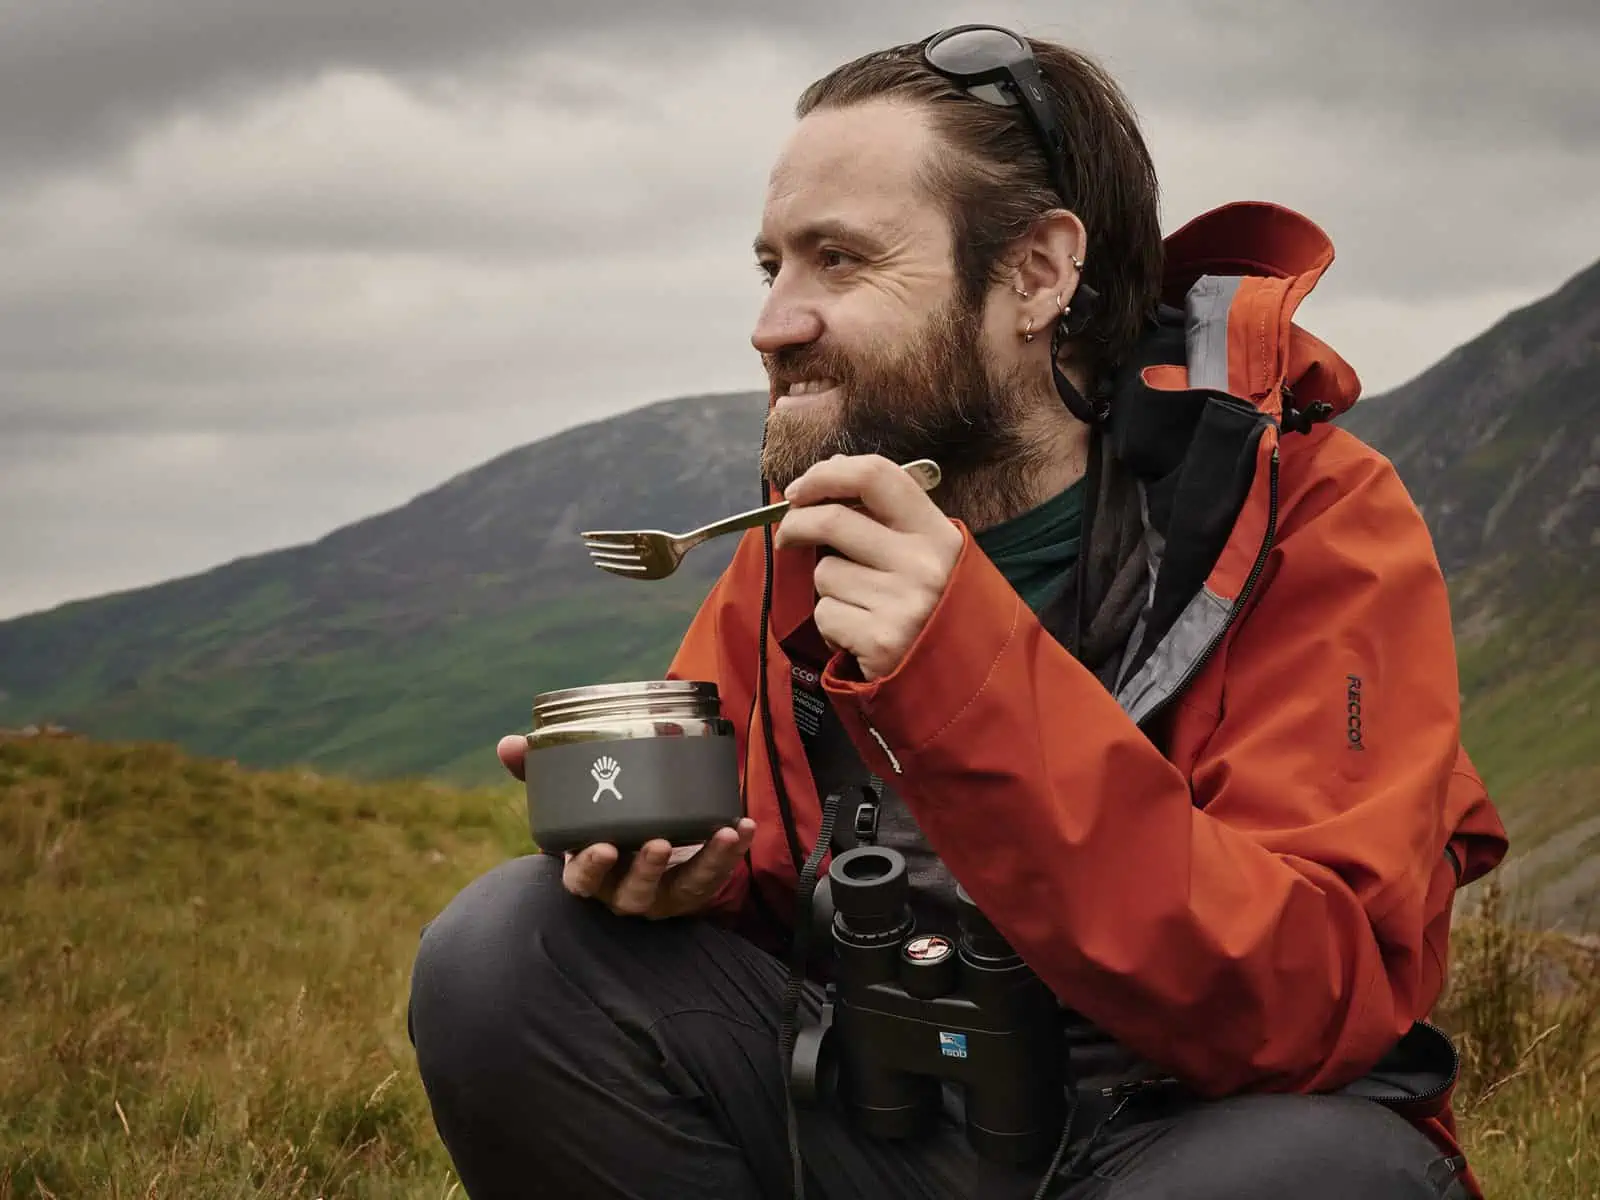 ID: A landscape image. Matt is sat on a rock eating from a food container with a fork. He is looking out at the view to his right and is smiling. He is wearing grey trousers, red coat and sunglasses on his head.